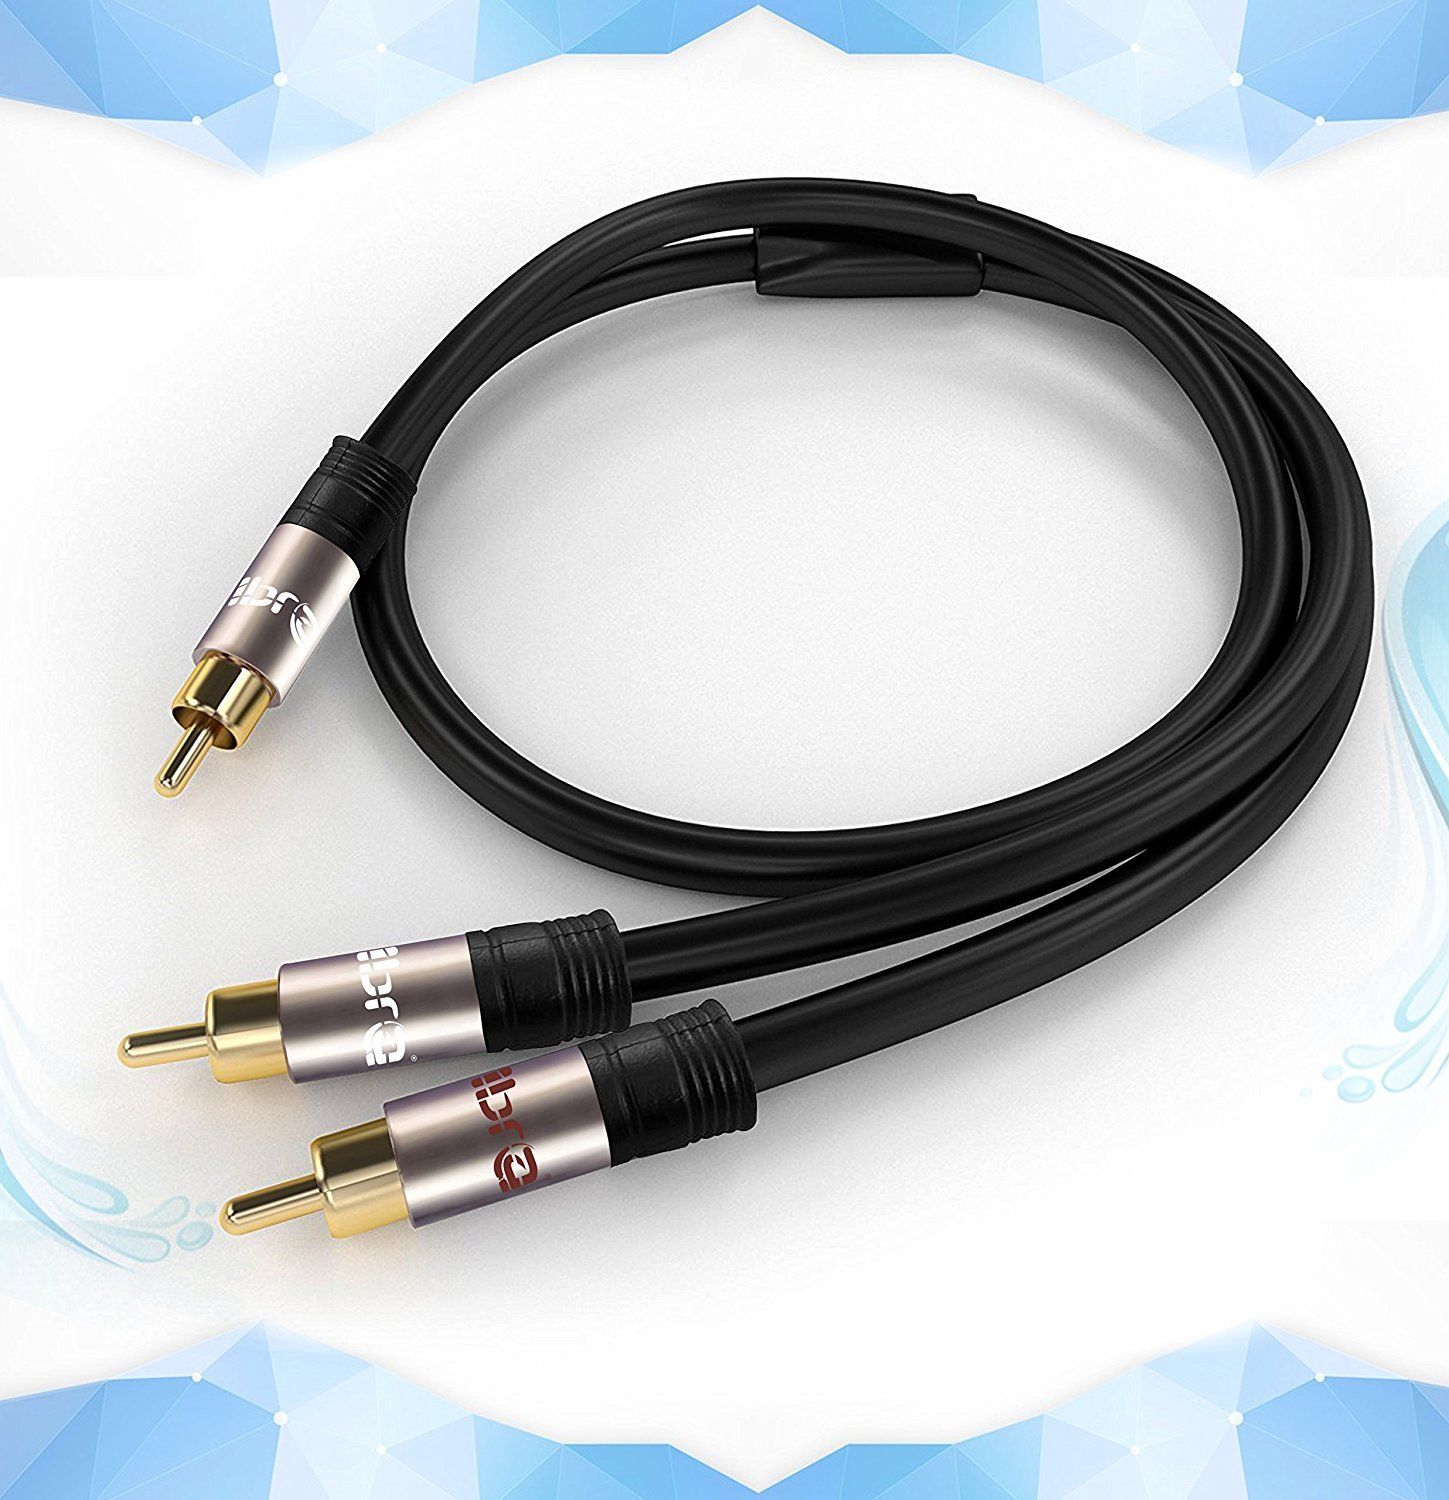 IBRA 20M Y Cable / Subwoofer Cable / Audio Cable / RCA Cable (1 x RCA to 2 x RCA) - GUN Metal Range